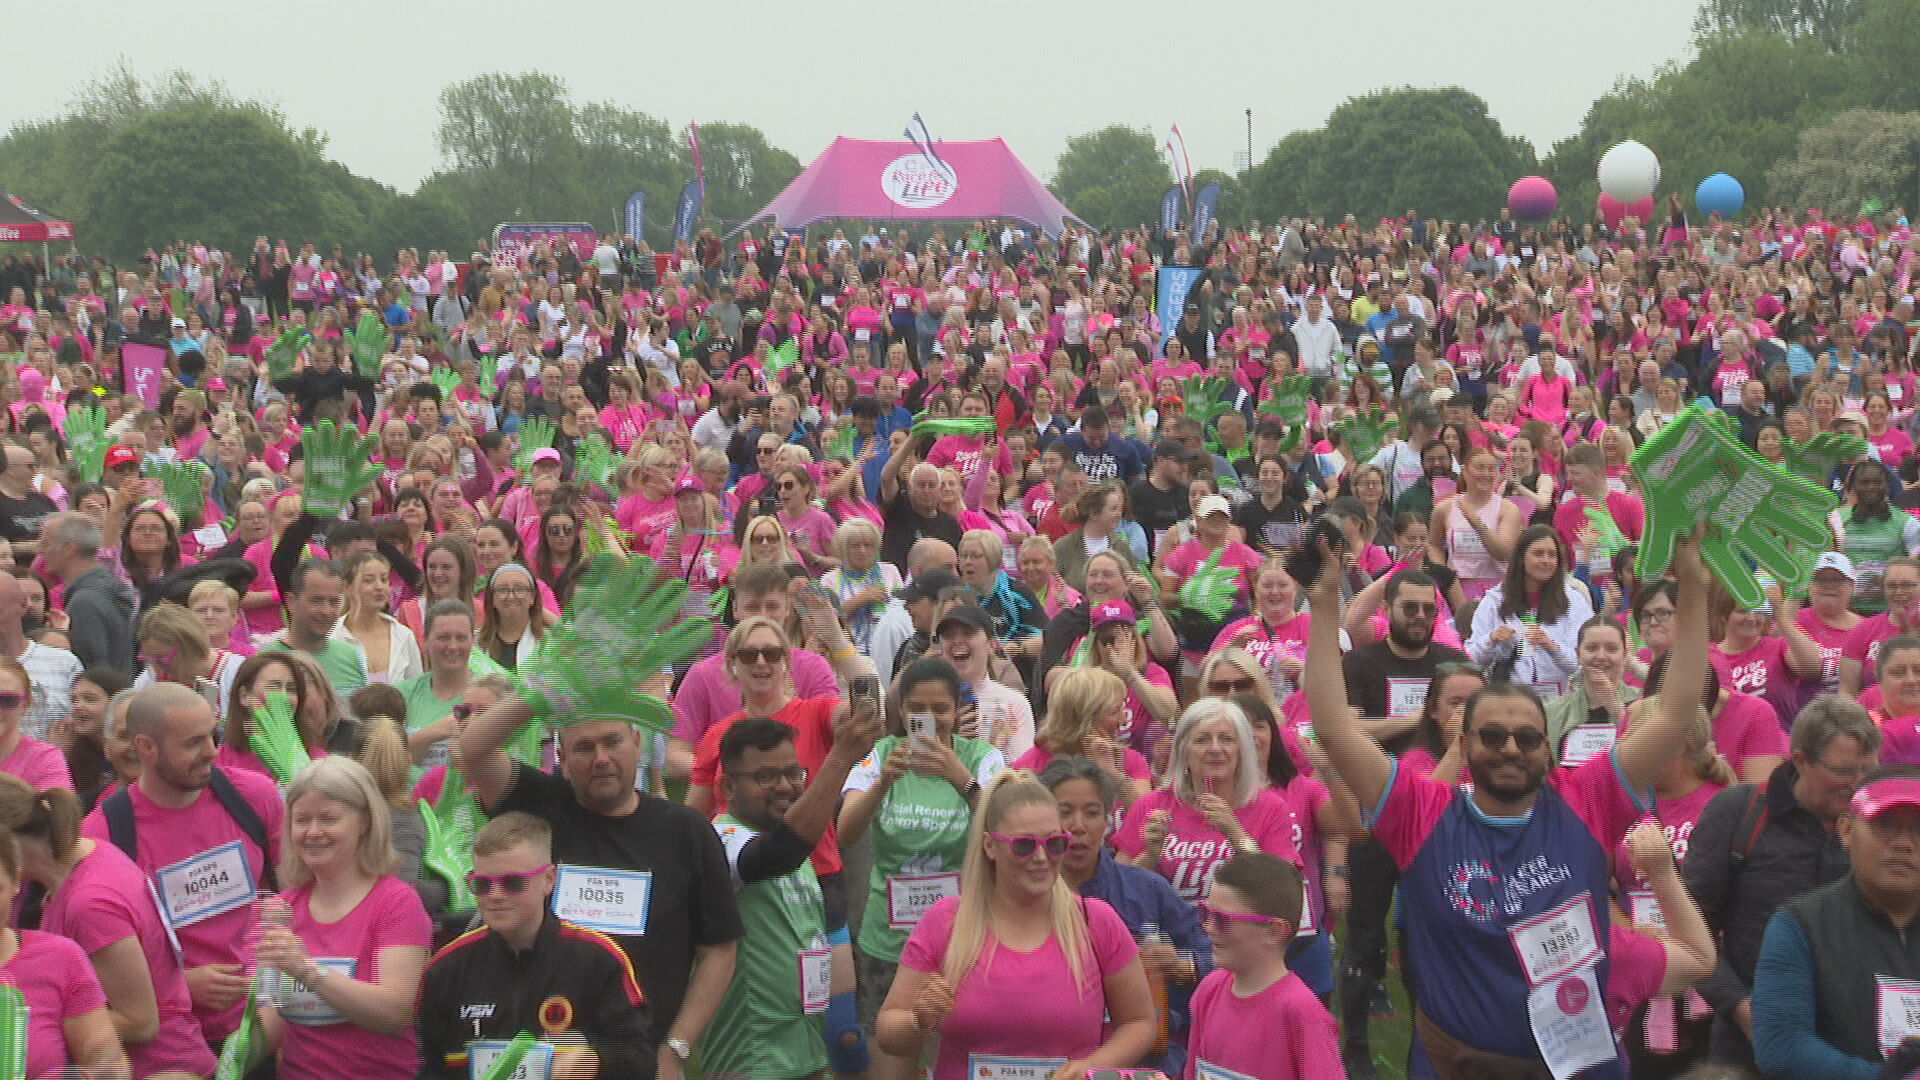 Glasgow Green was awash with pink as thousands of people gathered at the starting line for the annual Race for Life event.